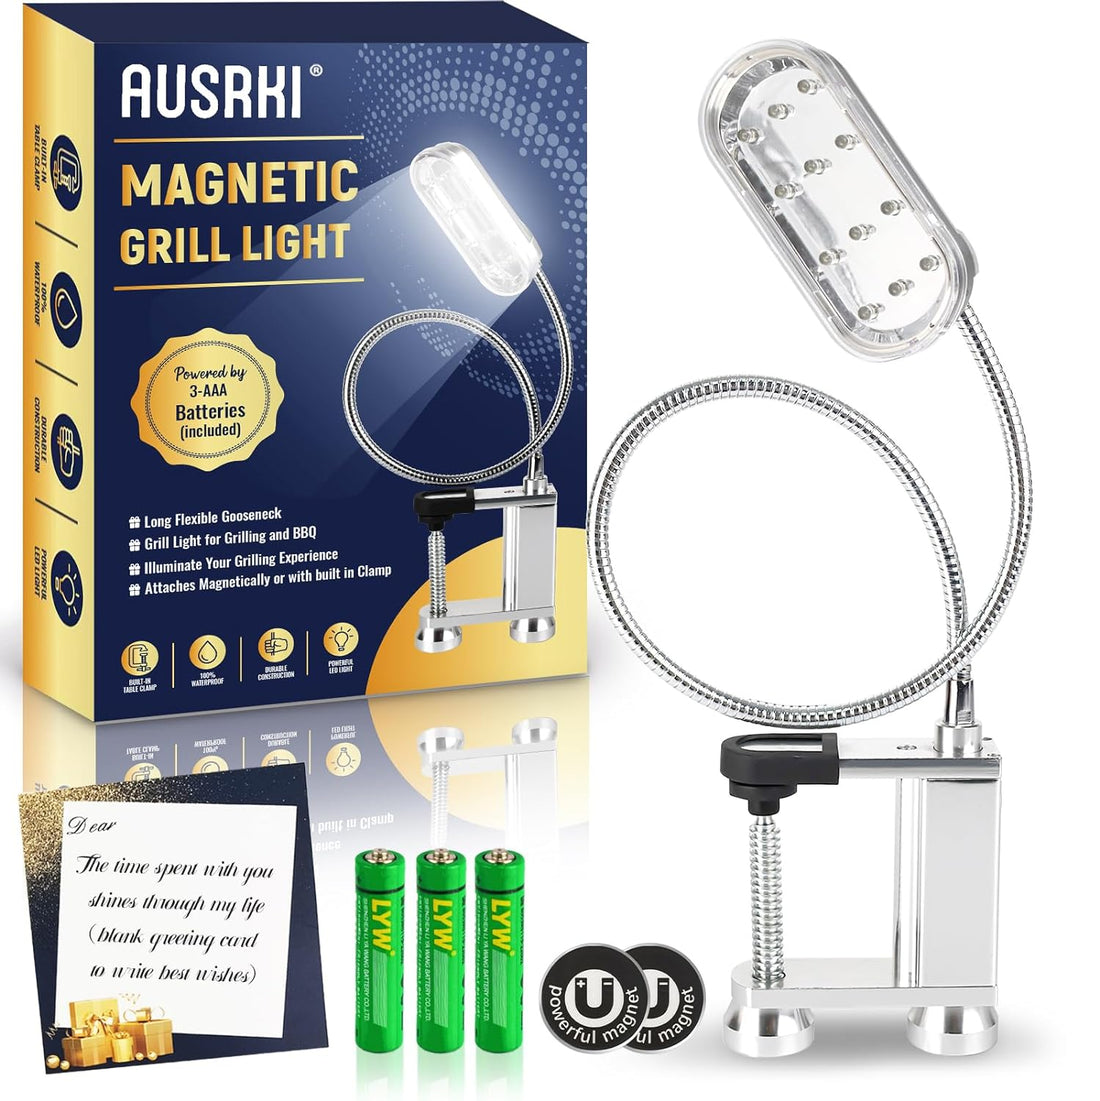 AUSRKI Barbecue Grill Light, Bright BBQ Grilling Accessories for Outdoor Grill, Magnetic Base or Built-in Clamp BBQ Light, Long Flexible Gooseneck, Stocking Stuffers Gifts for Men, Batteries Included